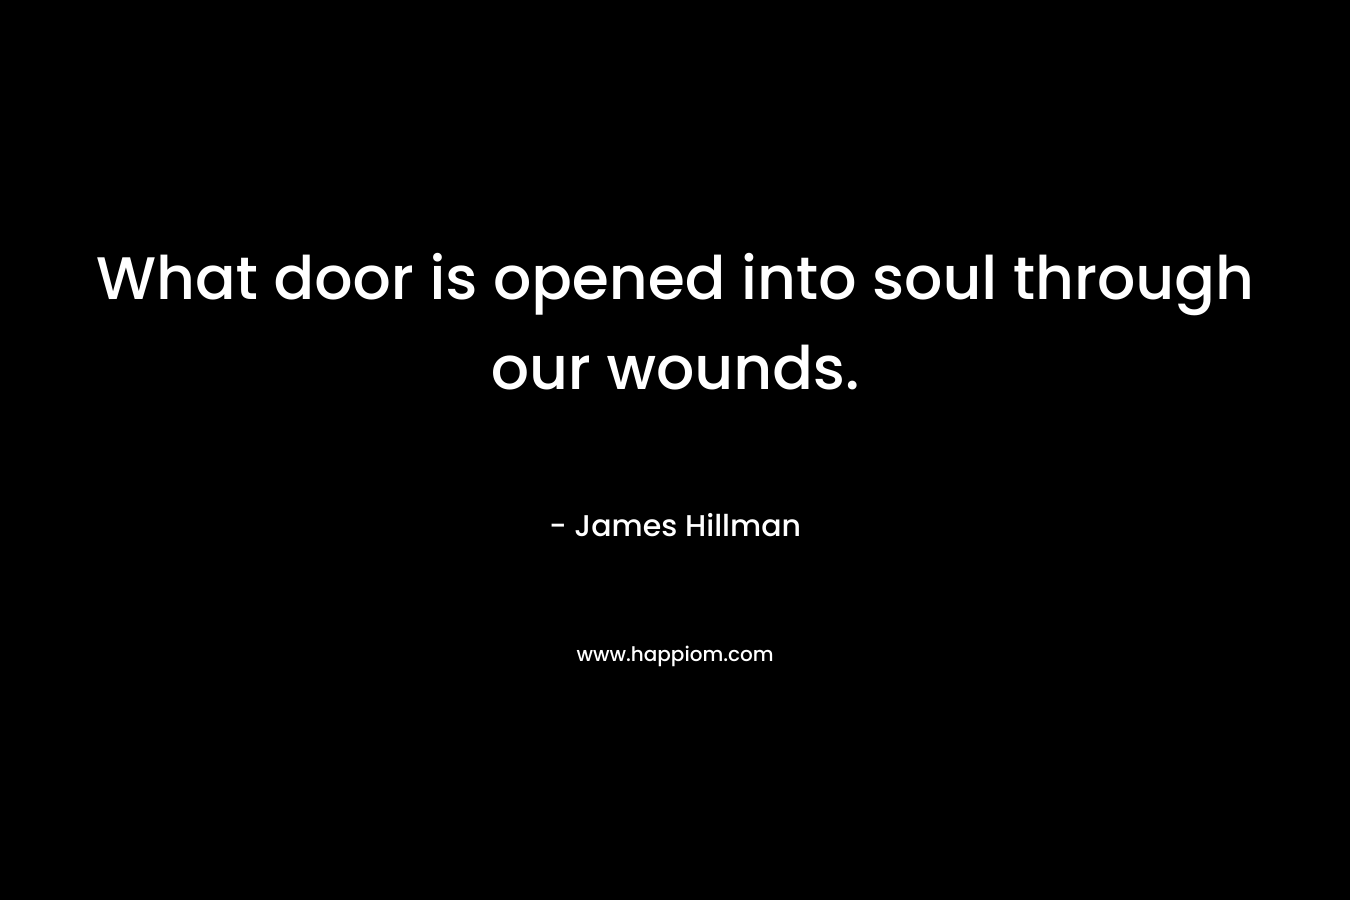 What door is opened into soul through our wounds.